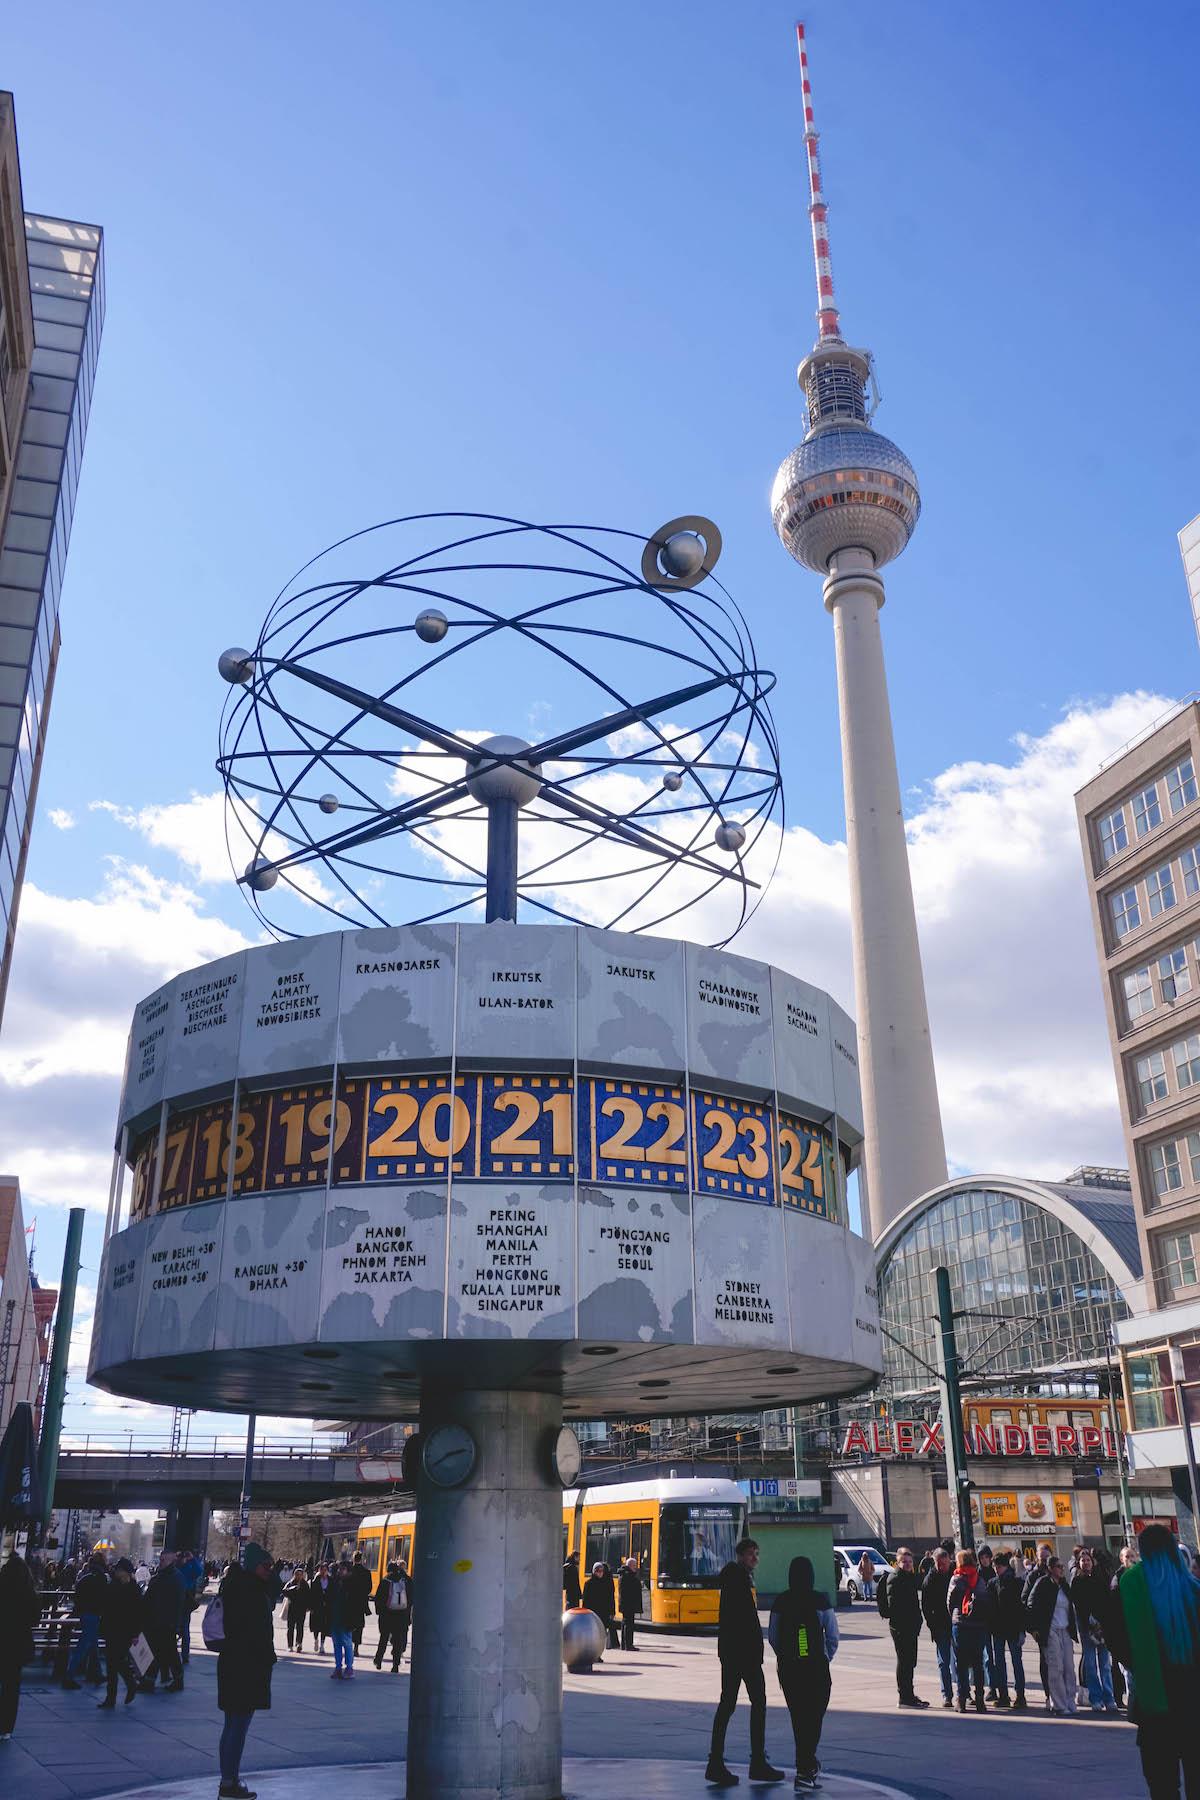 The World Clock at Alexanderplatz, with the TV tower in the background